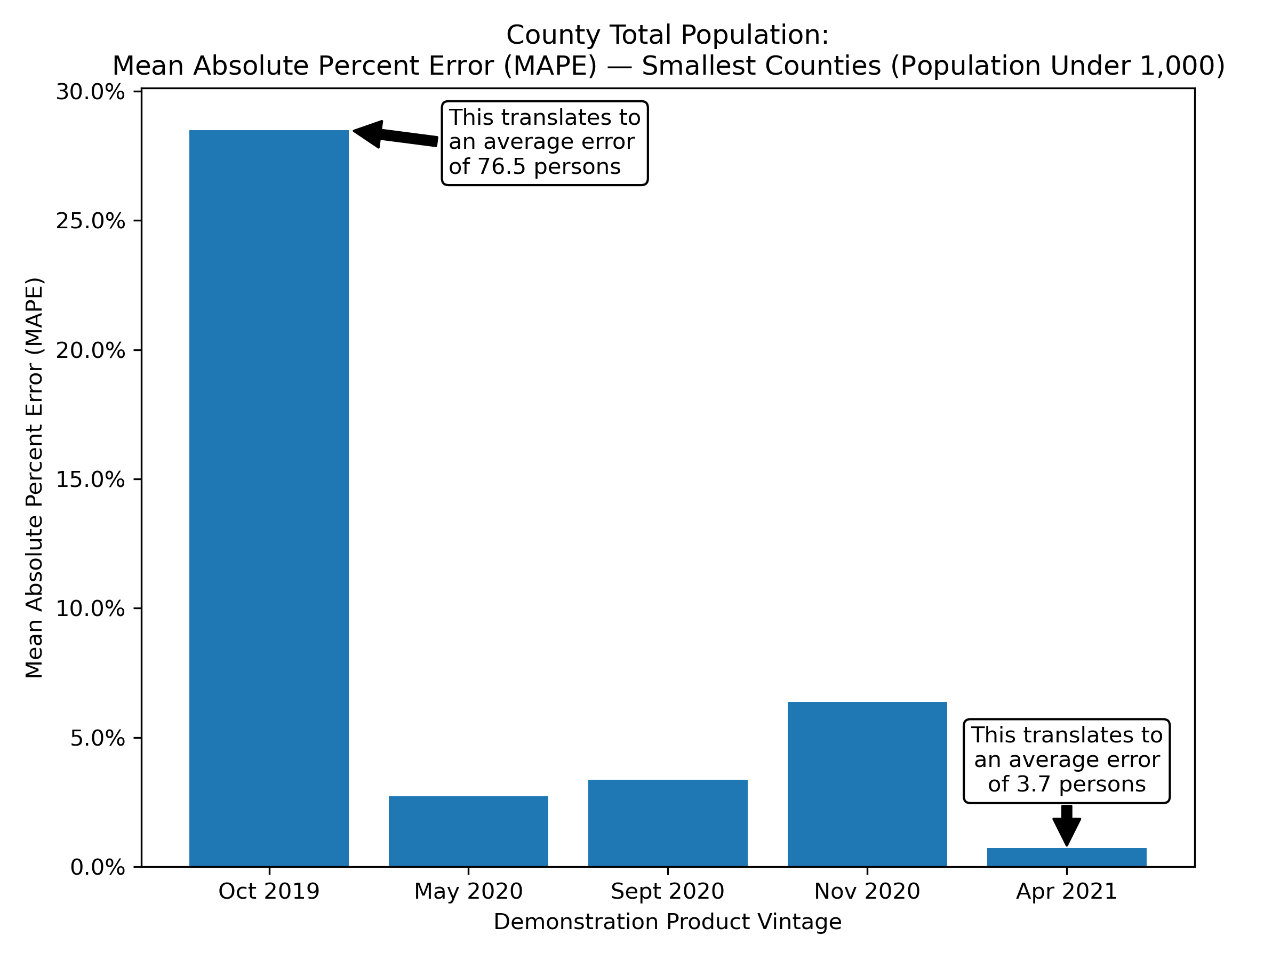 County Total Population: Smallest Counties (Populations Under 1,000)